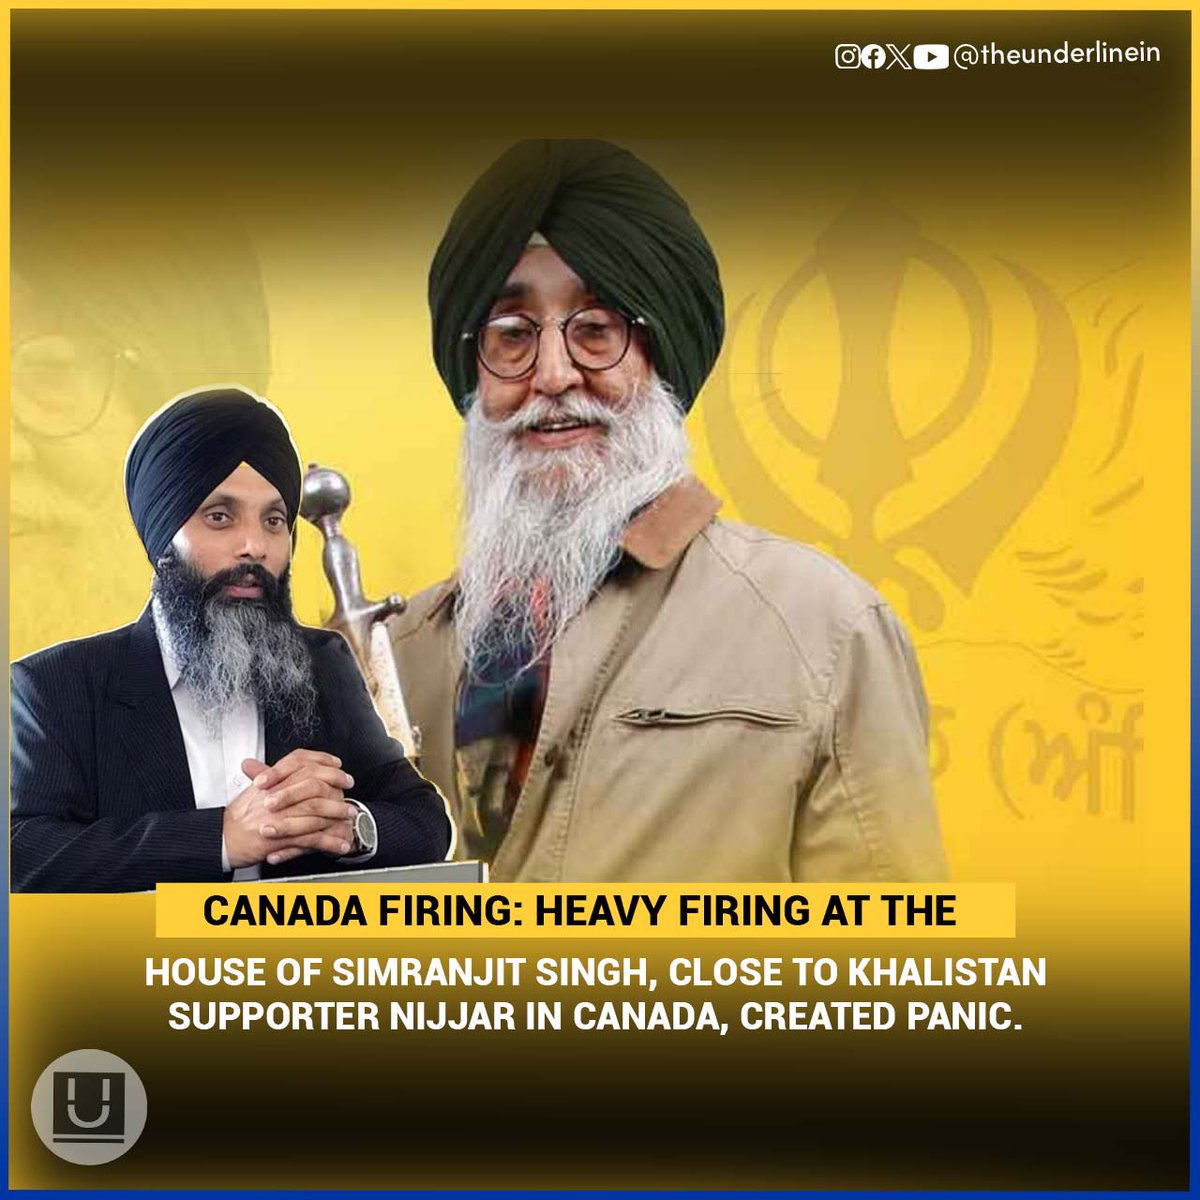 Canada Firing: Heavy firing at the house of Simranjit Singh, close to Khalistan supporter Nijjar in Canada, created panic.

#CanadaFires #Canada #Canadaindia #Khalistan #Khalistani #Firing #SimranjeetSingh #SURREY #unknownman 

Canada News: There was a stir when unknown people